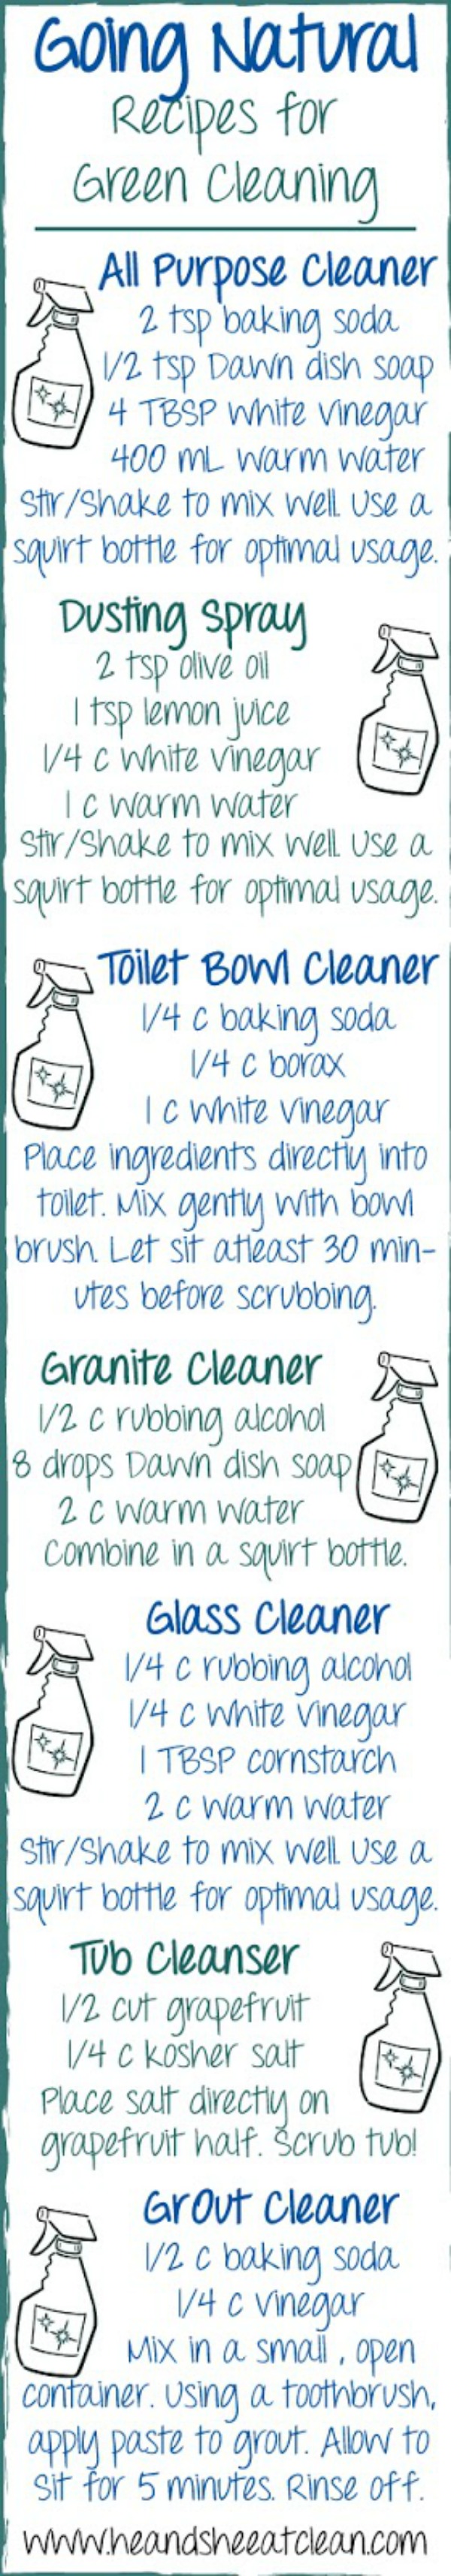 DIY Green Cleaning Product